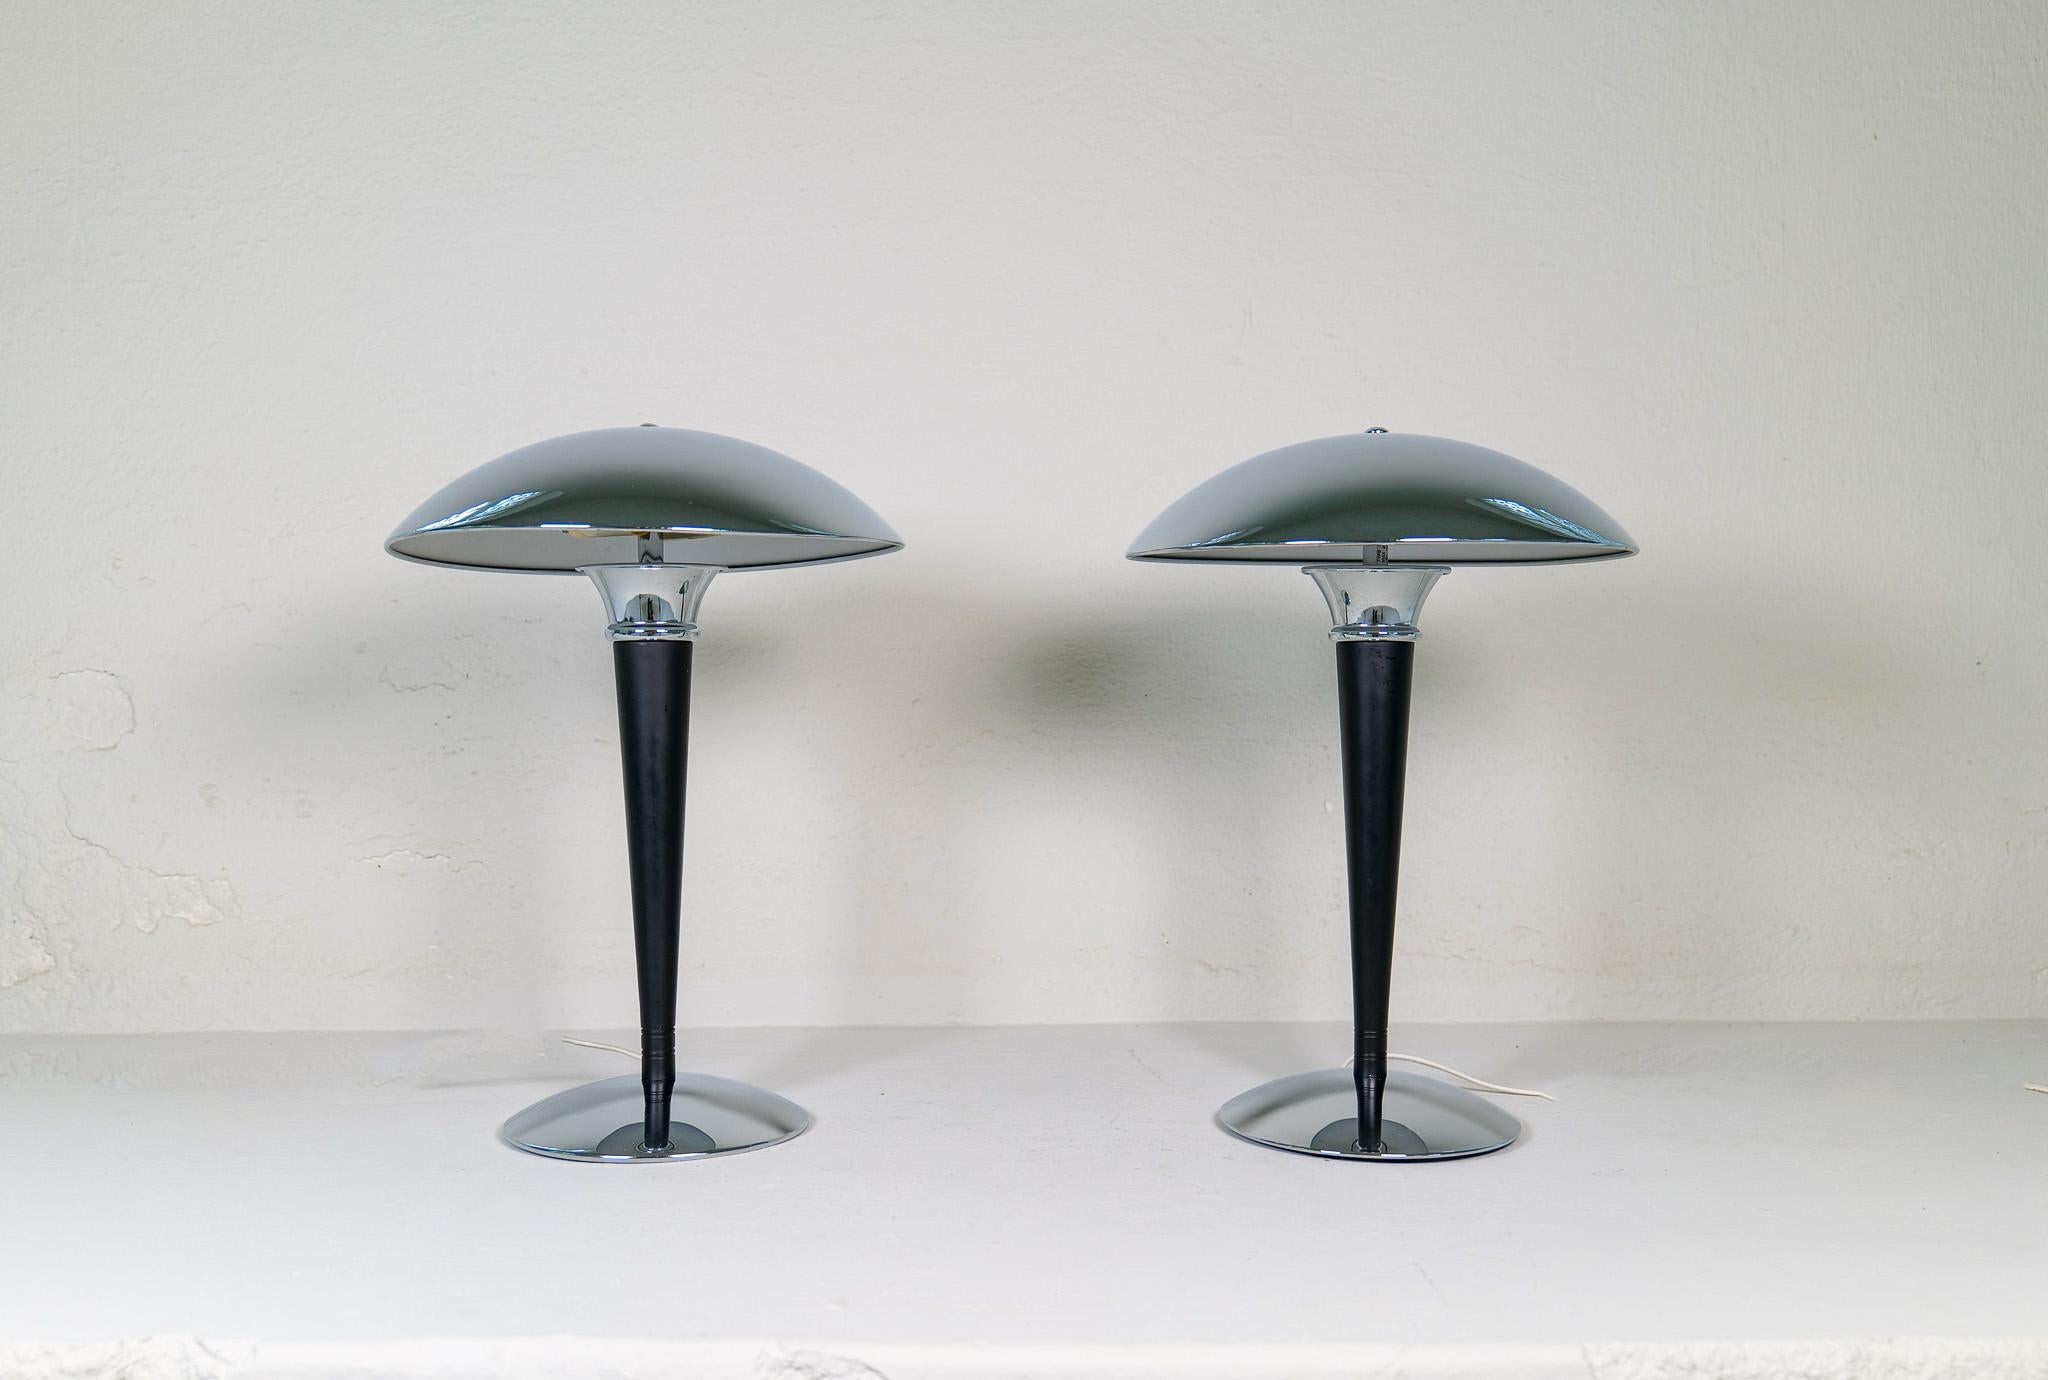 Art Deco style table lamps made in Sweden and produced for Ikea in the 1980s. Whit its chromed details and mushrom top it gives a nice look with that Art Deco 1980s look.

Good vintage, working condition, small dents, and wear.

Dimensions: H 45 cm,